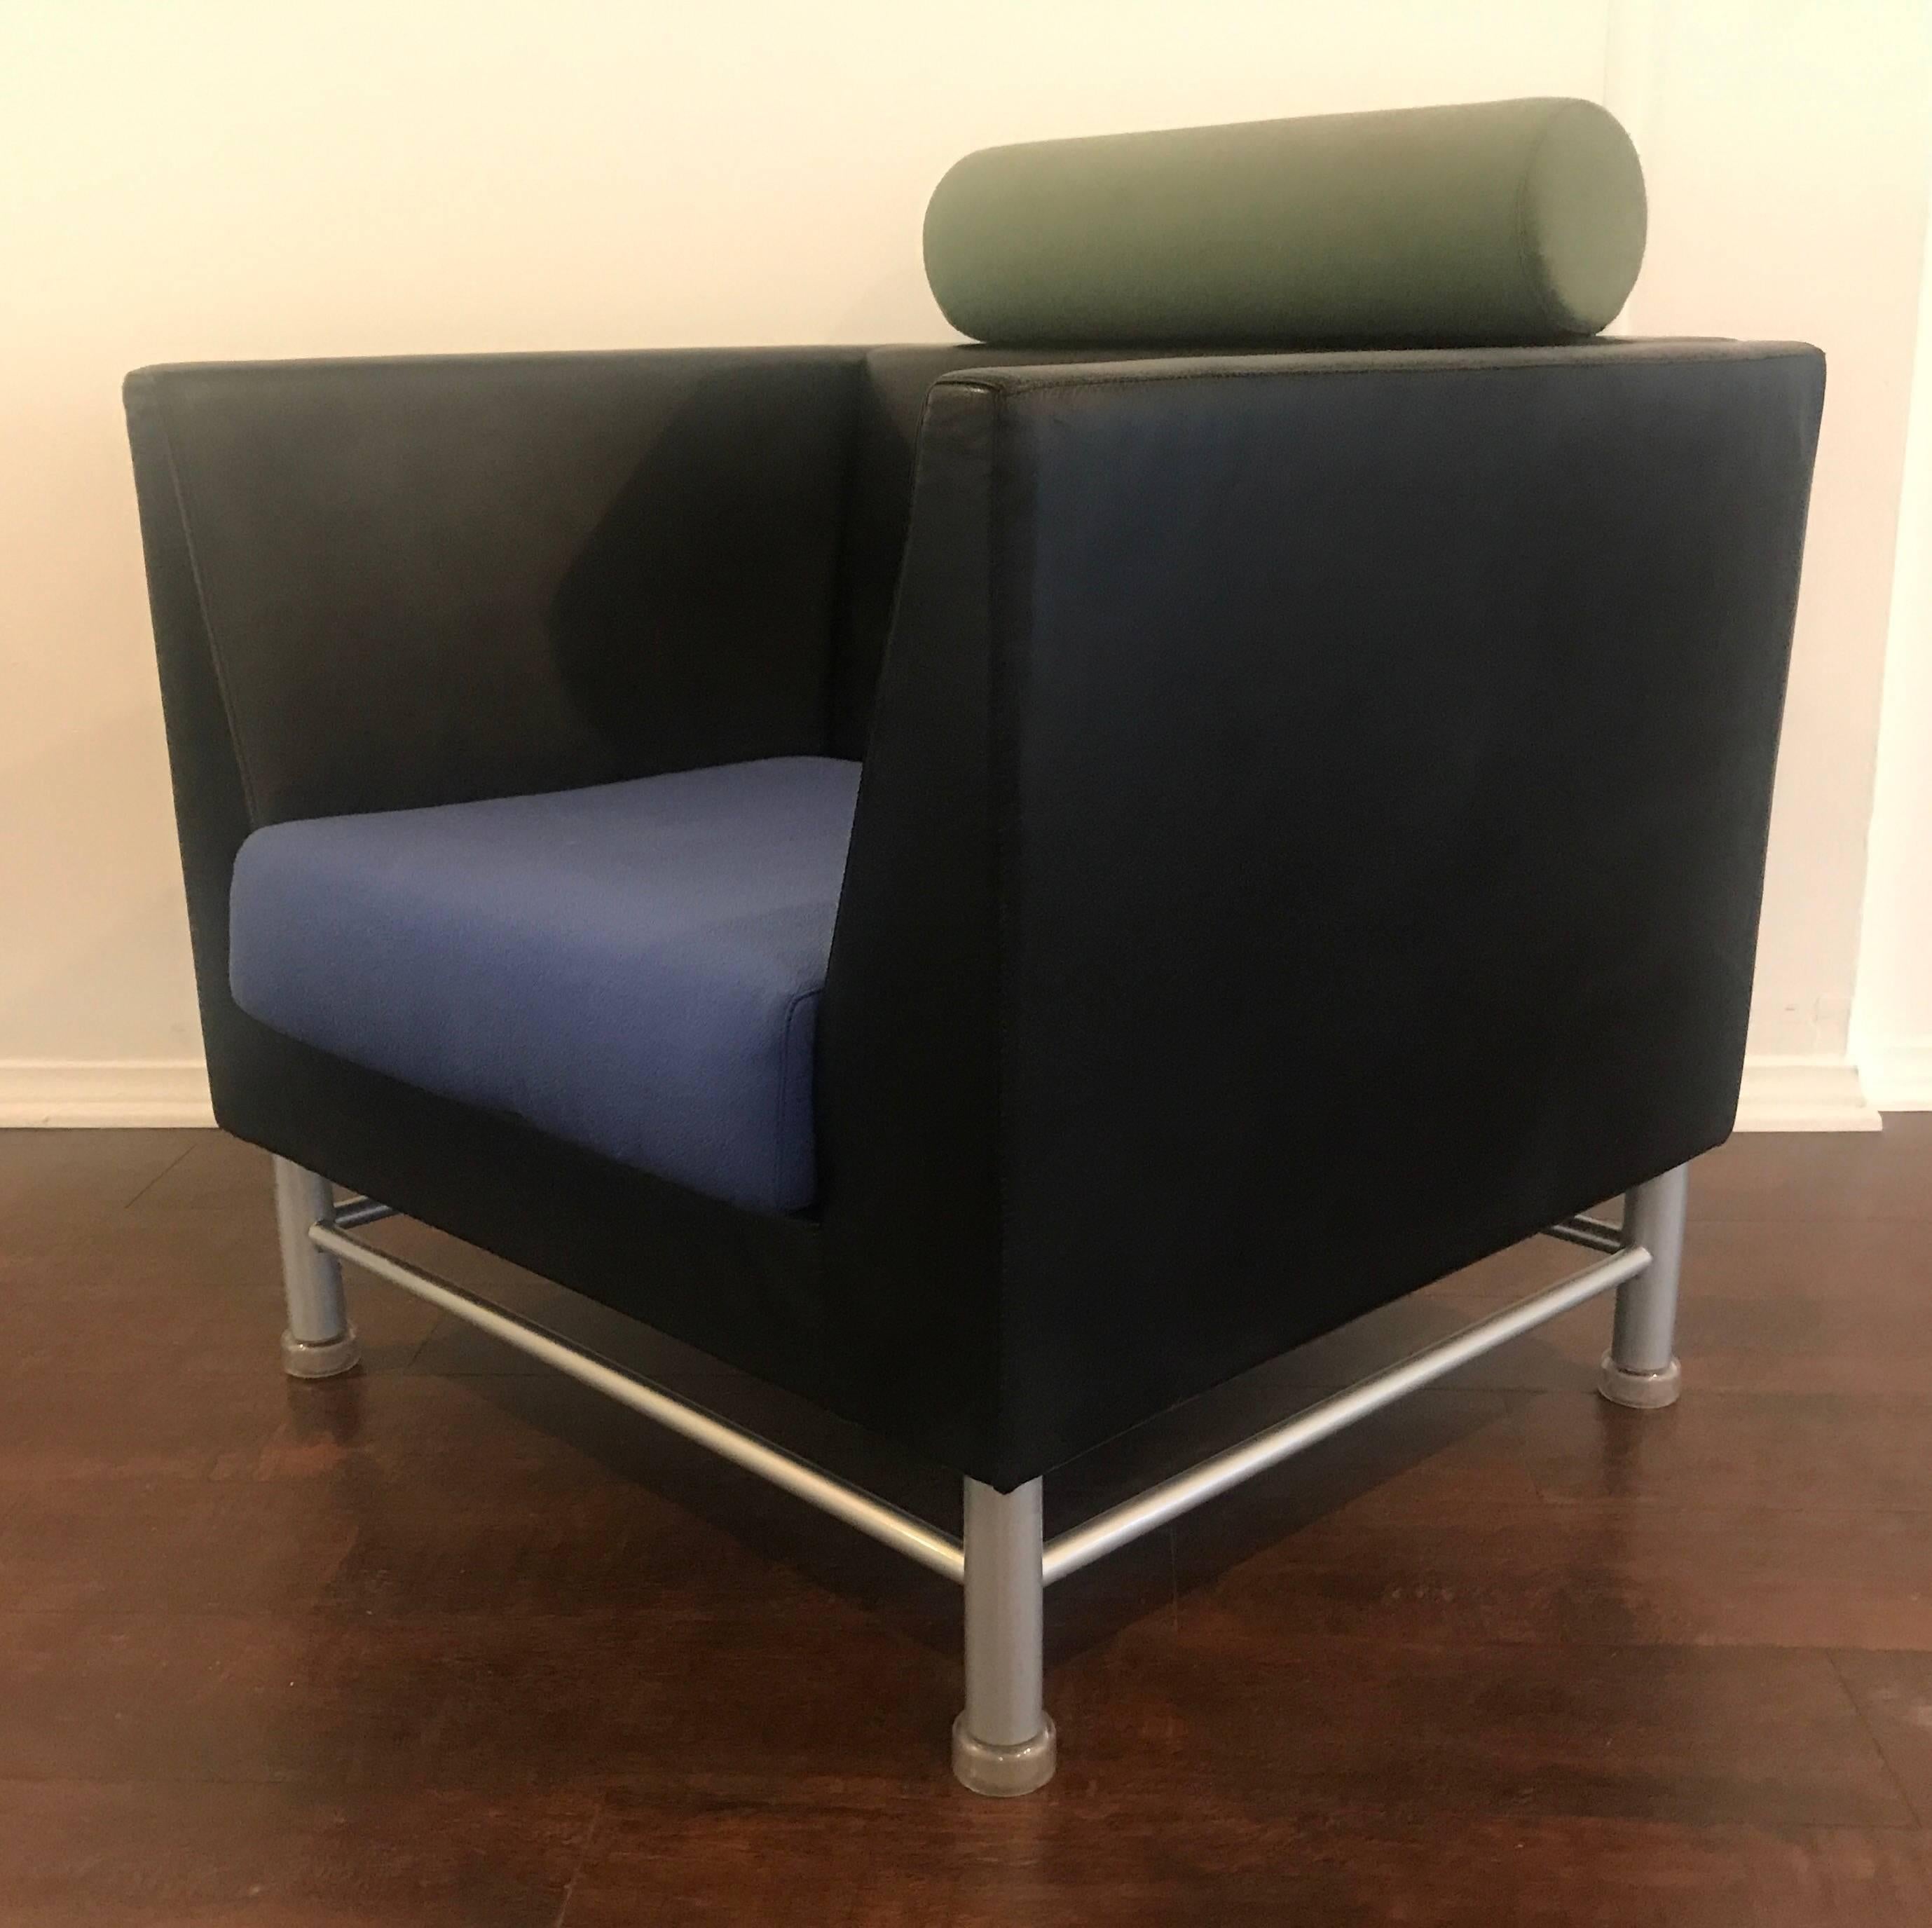 Steel Ettore Sottsass Knoll East Side Chairs 1980s Leather